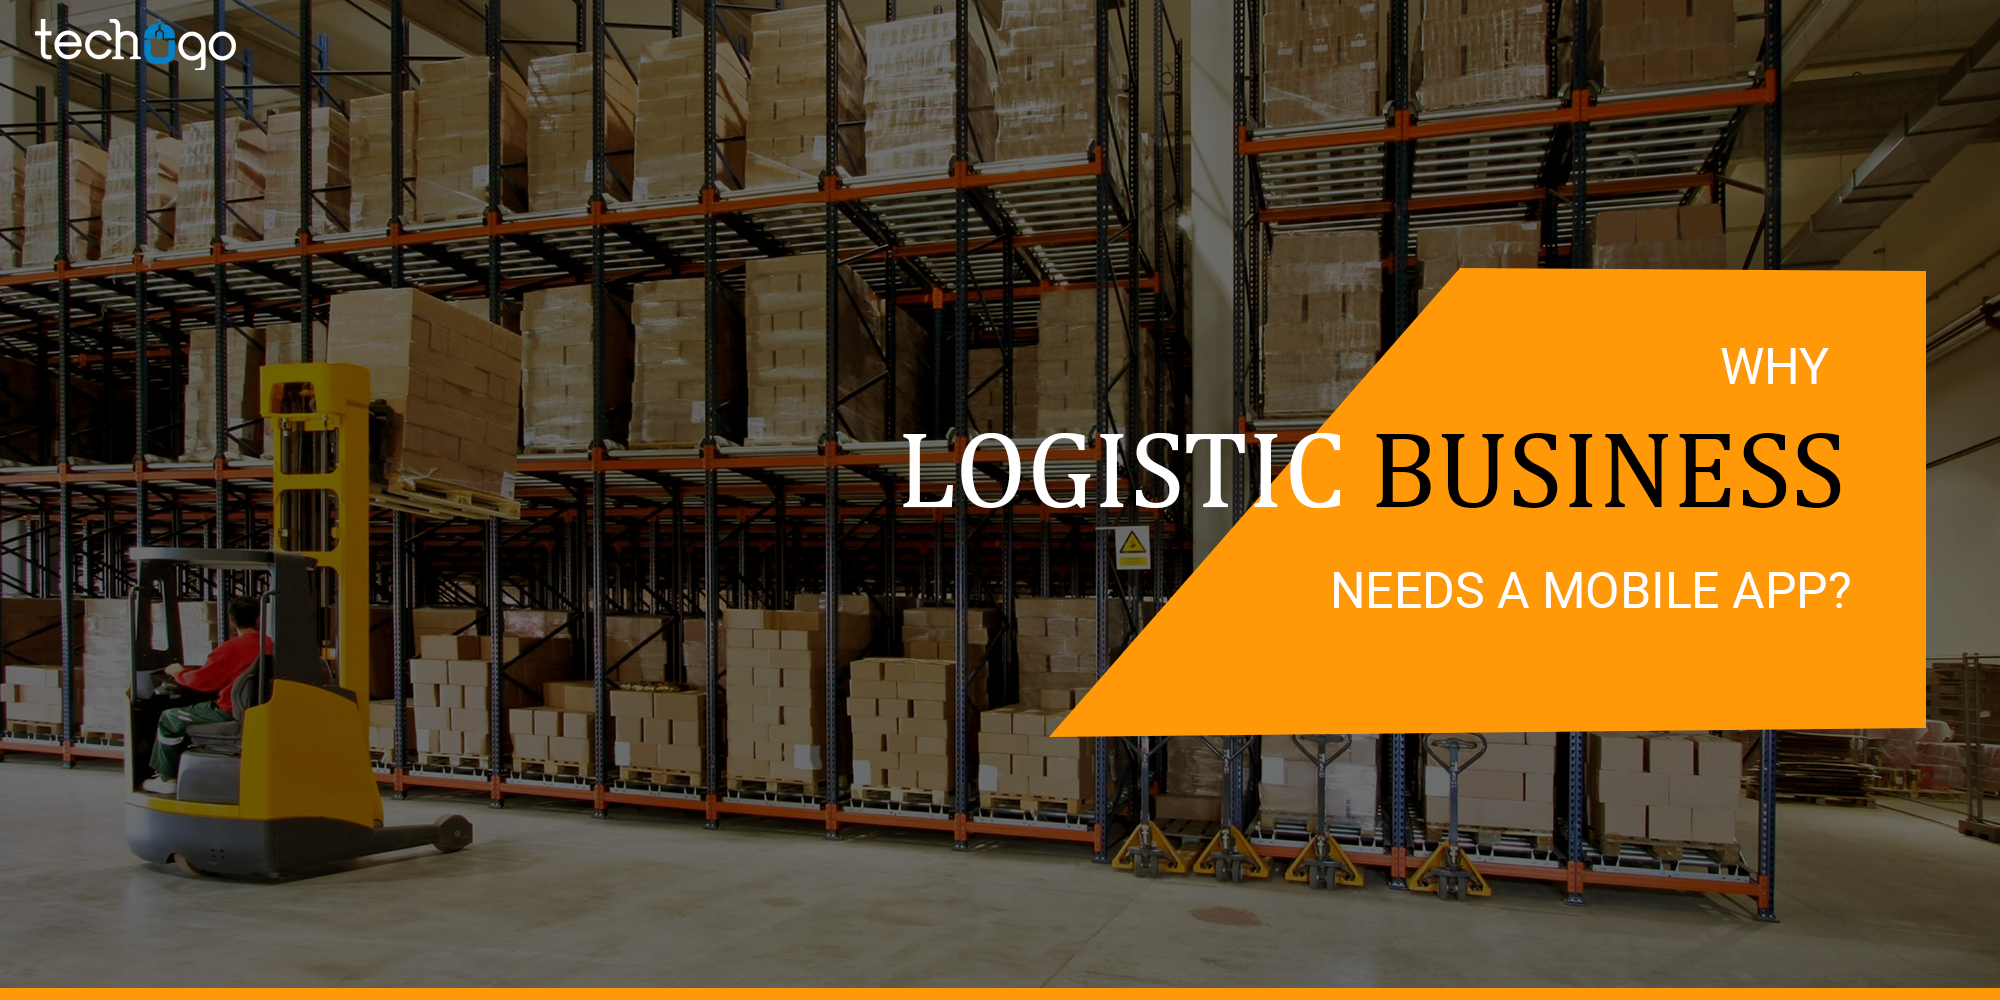 Why Logistic Business Needs A Mobile App